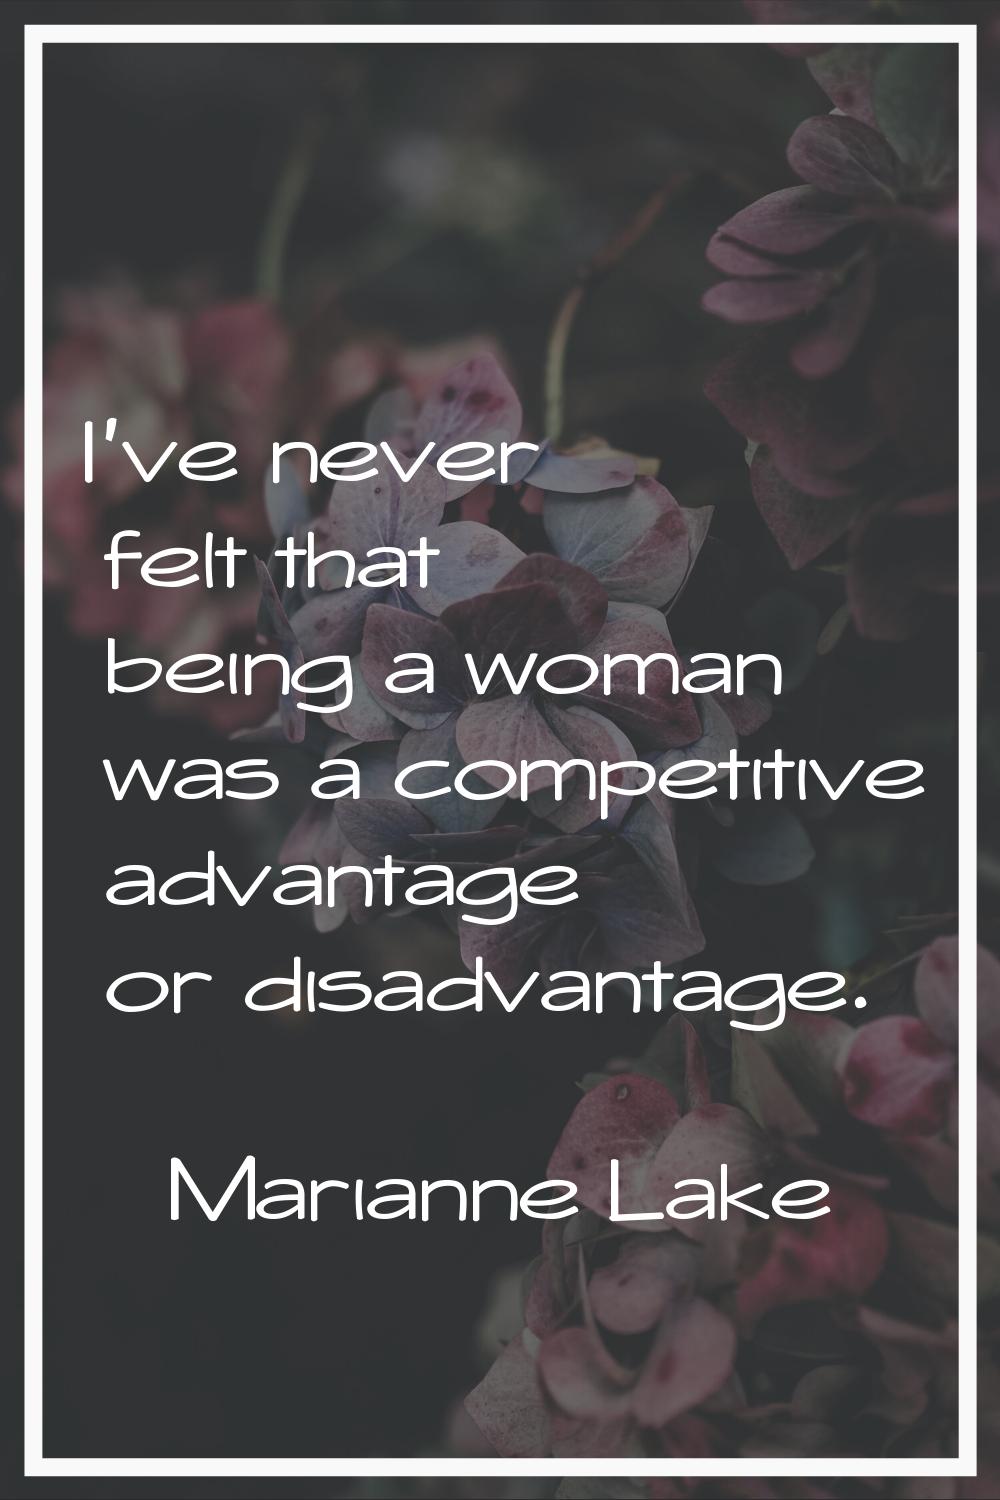 I've never felt that being a woman was a competitive advantage or disadvantage.